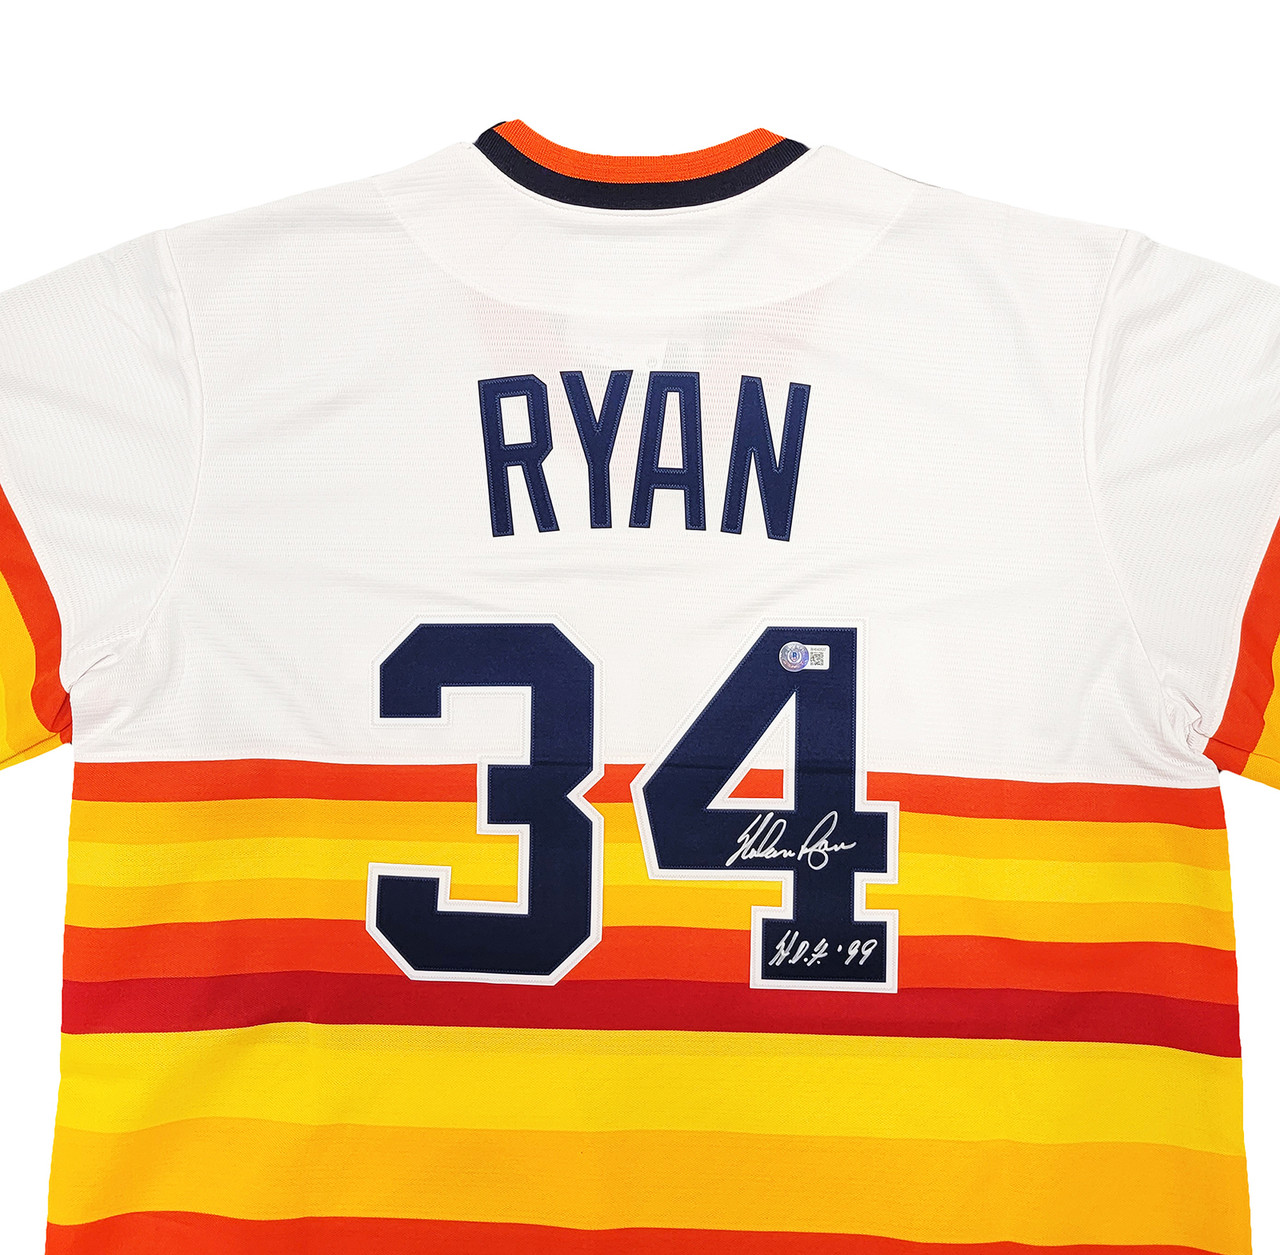 Nolan Ryan Autographed White Astros Jersey - Beautifully Matted and Framed  - Hand Signed By Ryan and Certified Authentic by AI - Includes Certificate  of Authenticity at 's Sports Collectibles Store